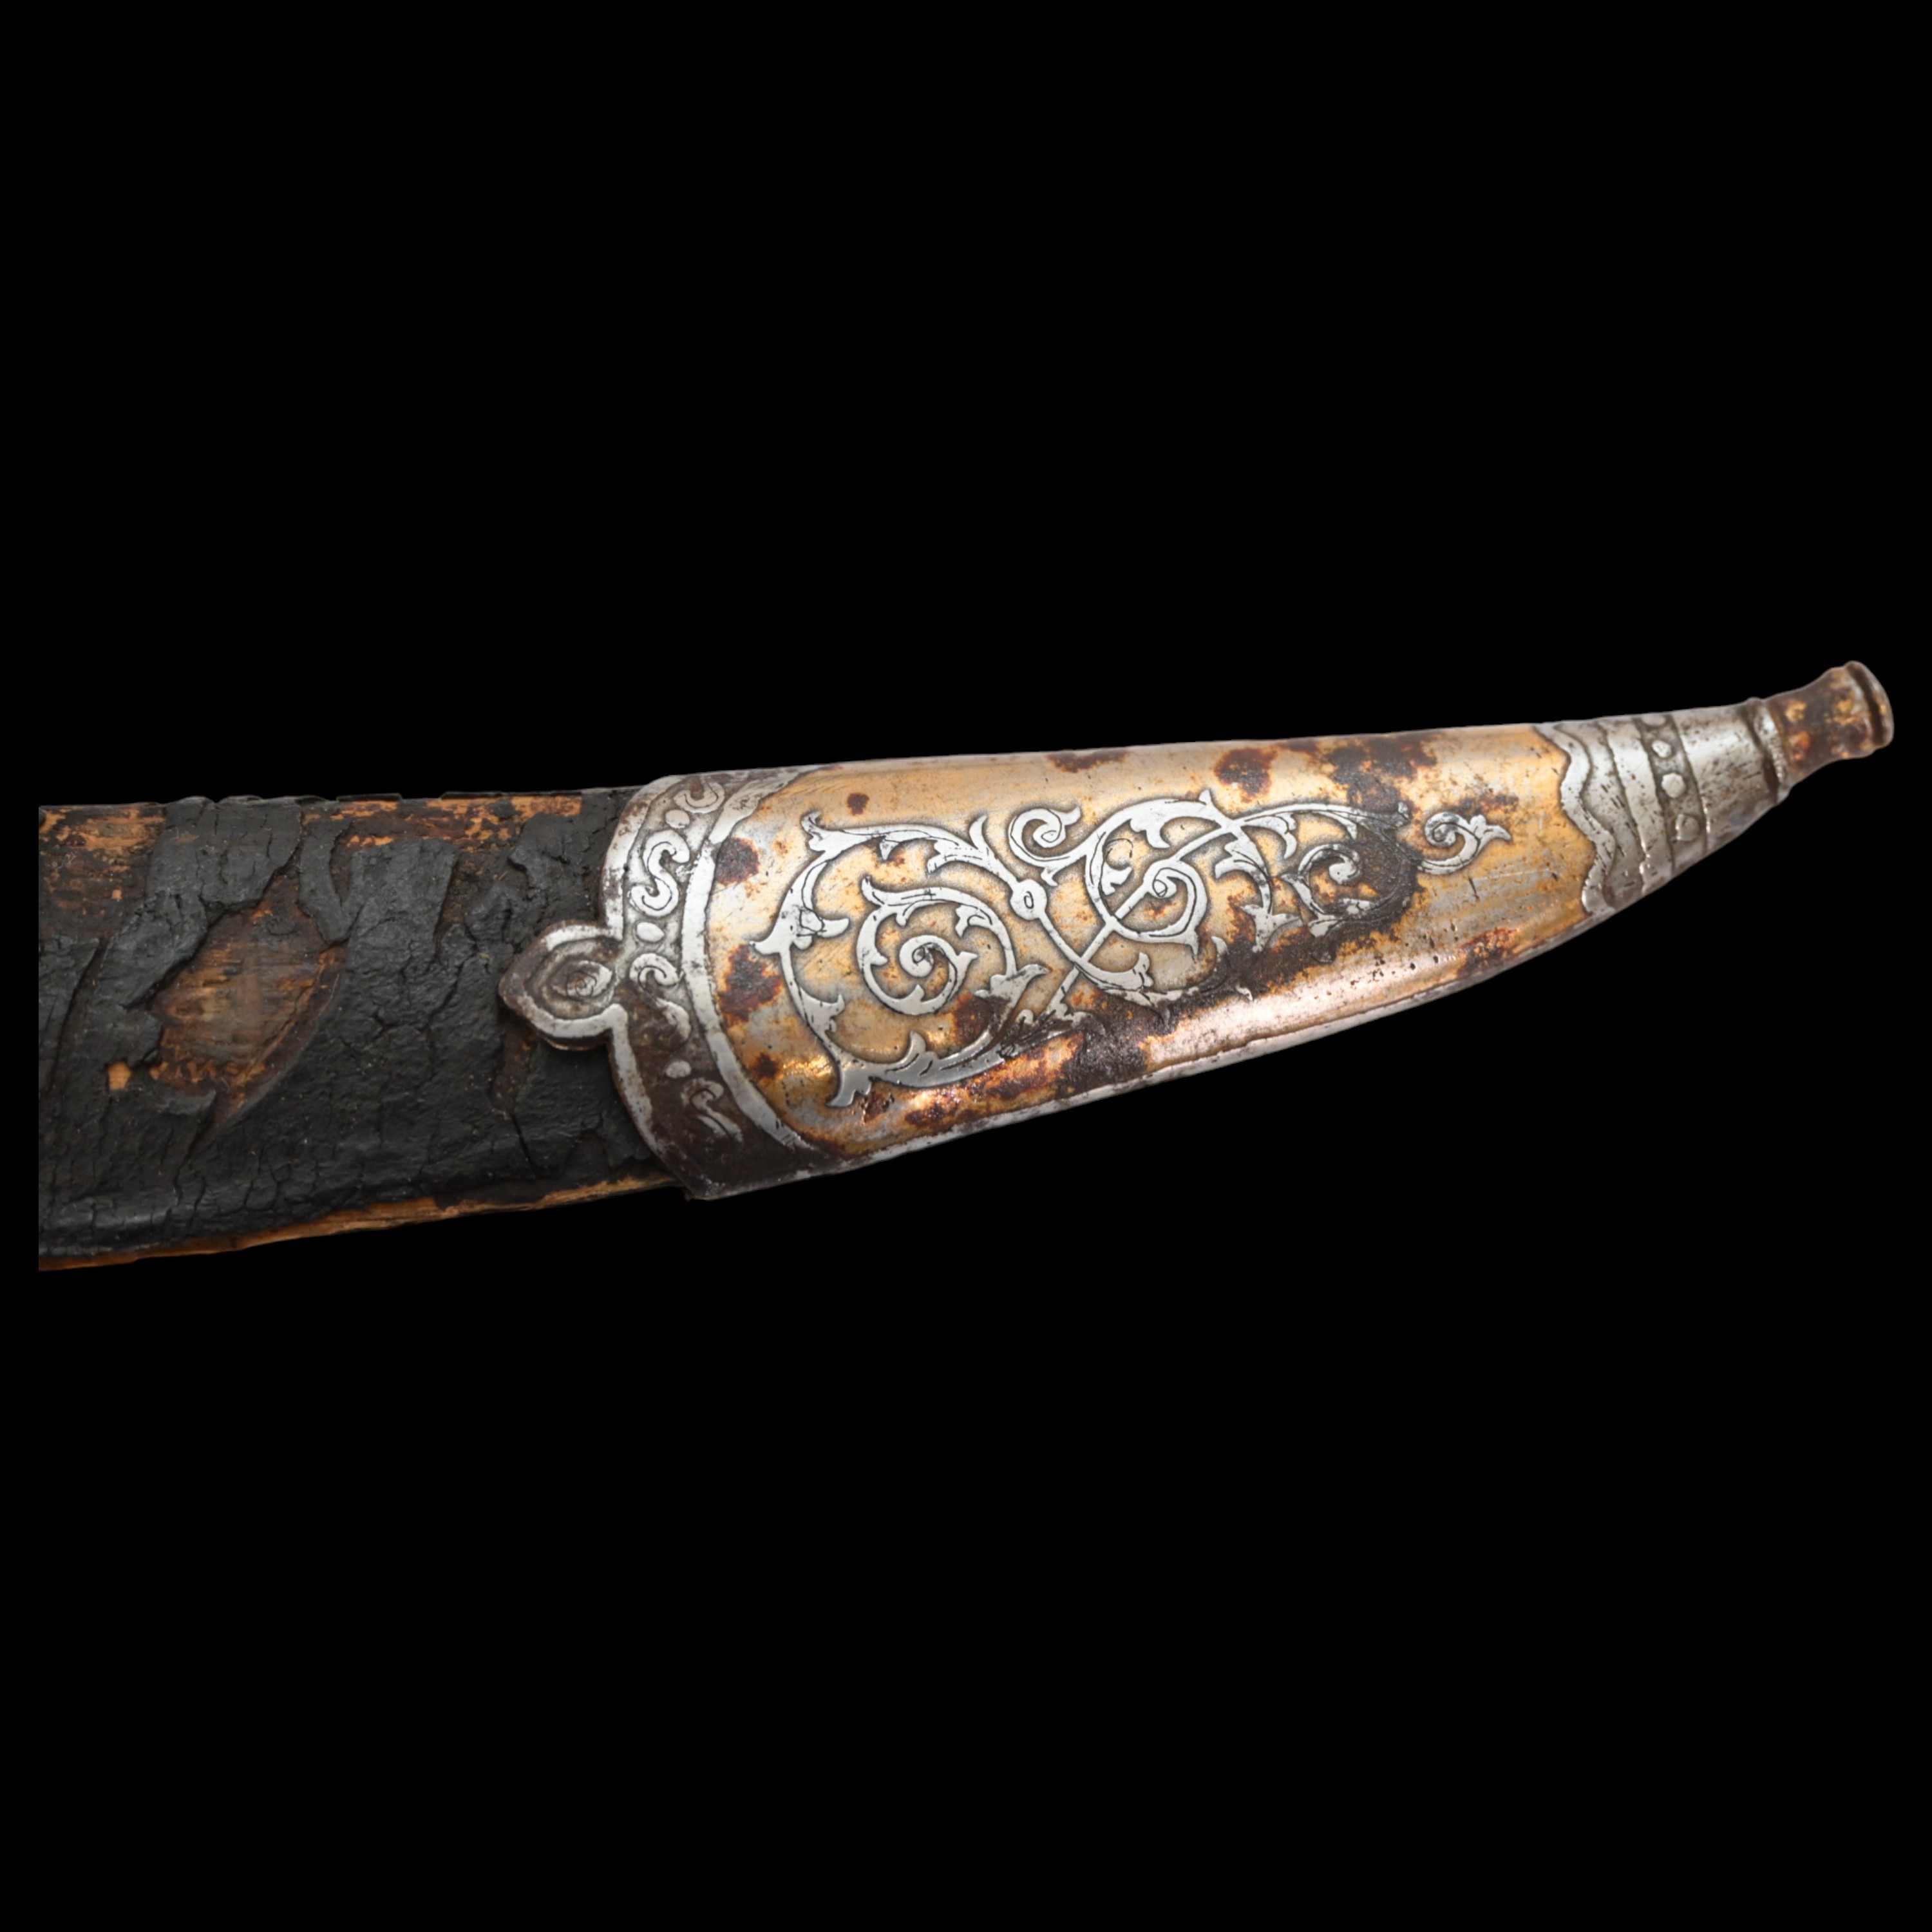 RARE HUNTING KNIFE, DECORATED WITH GOLD AND BLUE, RUSSIAN EMPIRE, ZLATOUST, 1889. - Image 21 of 26